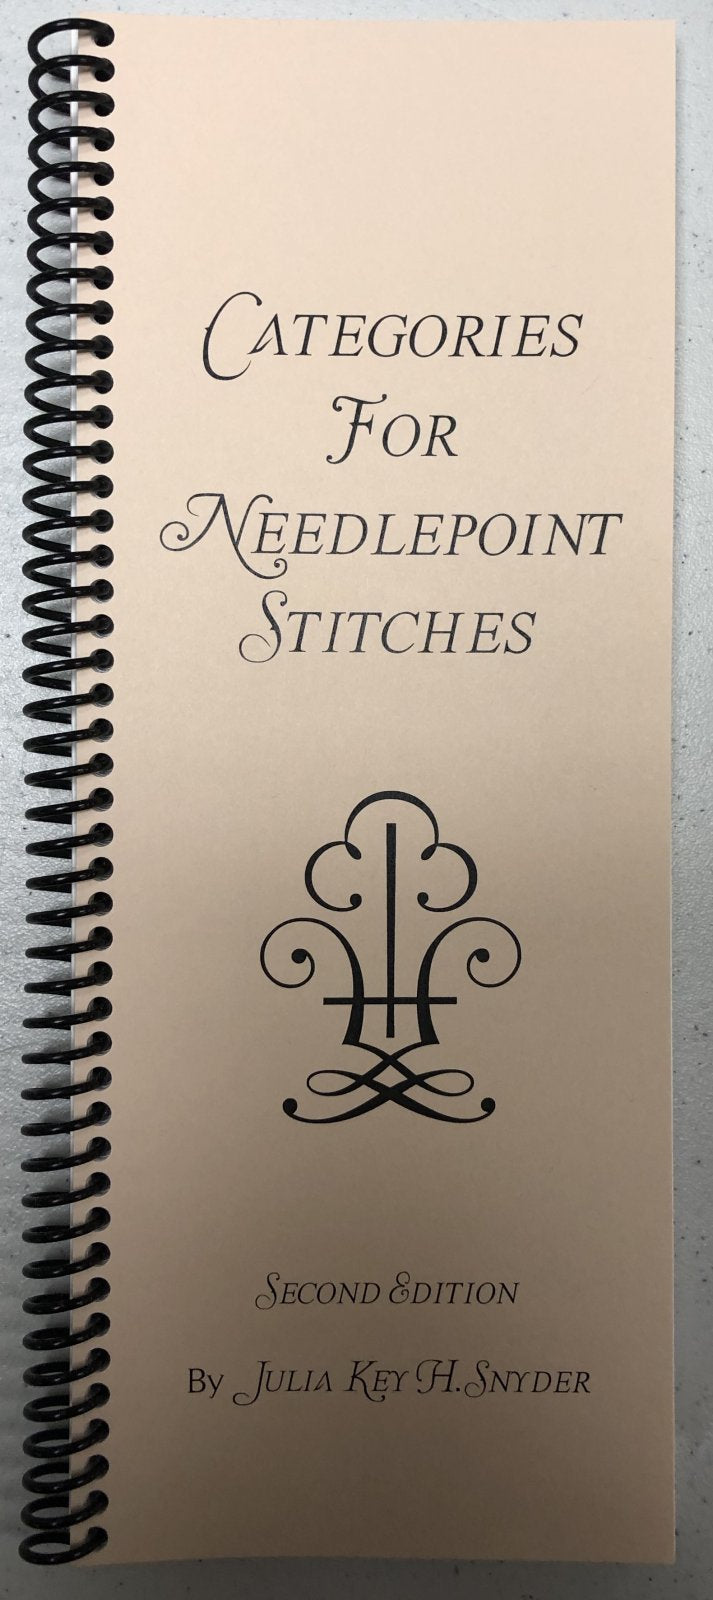 categories for needlepoint